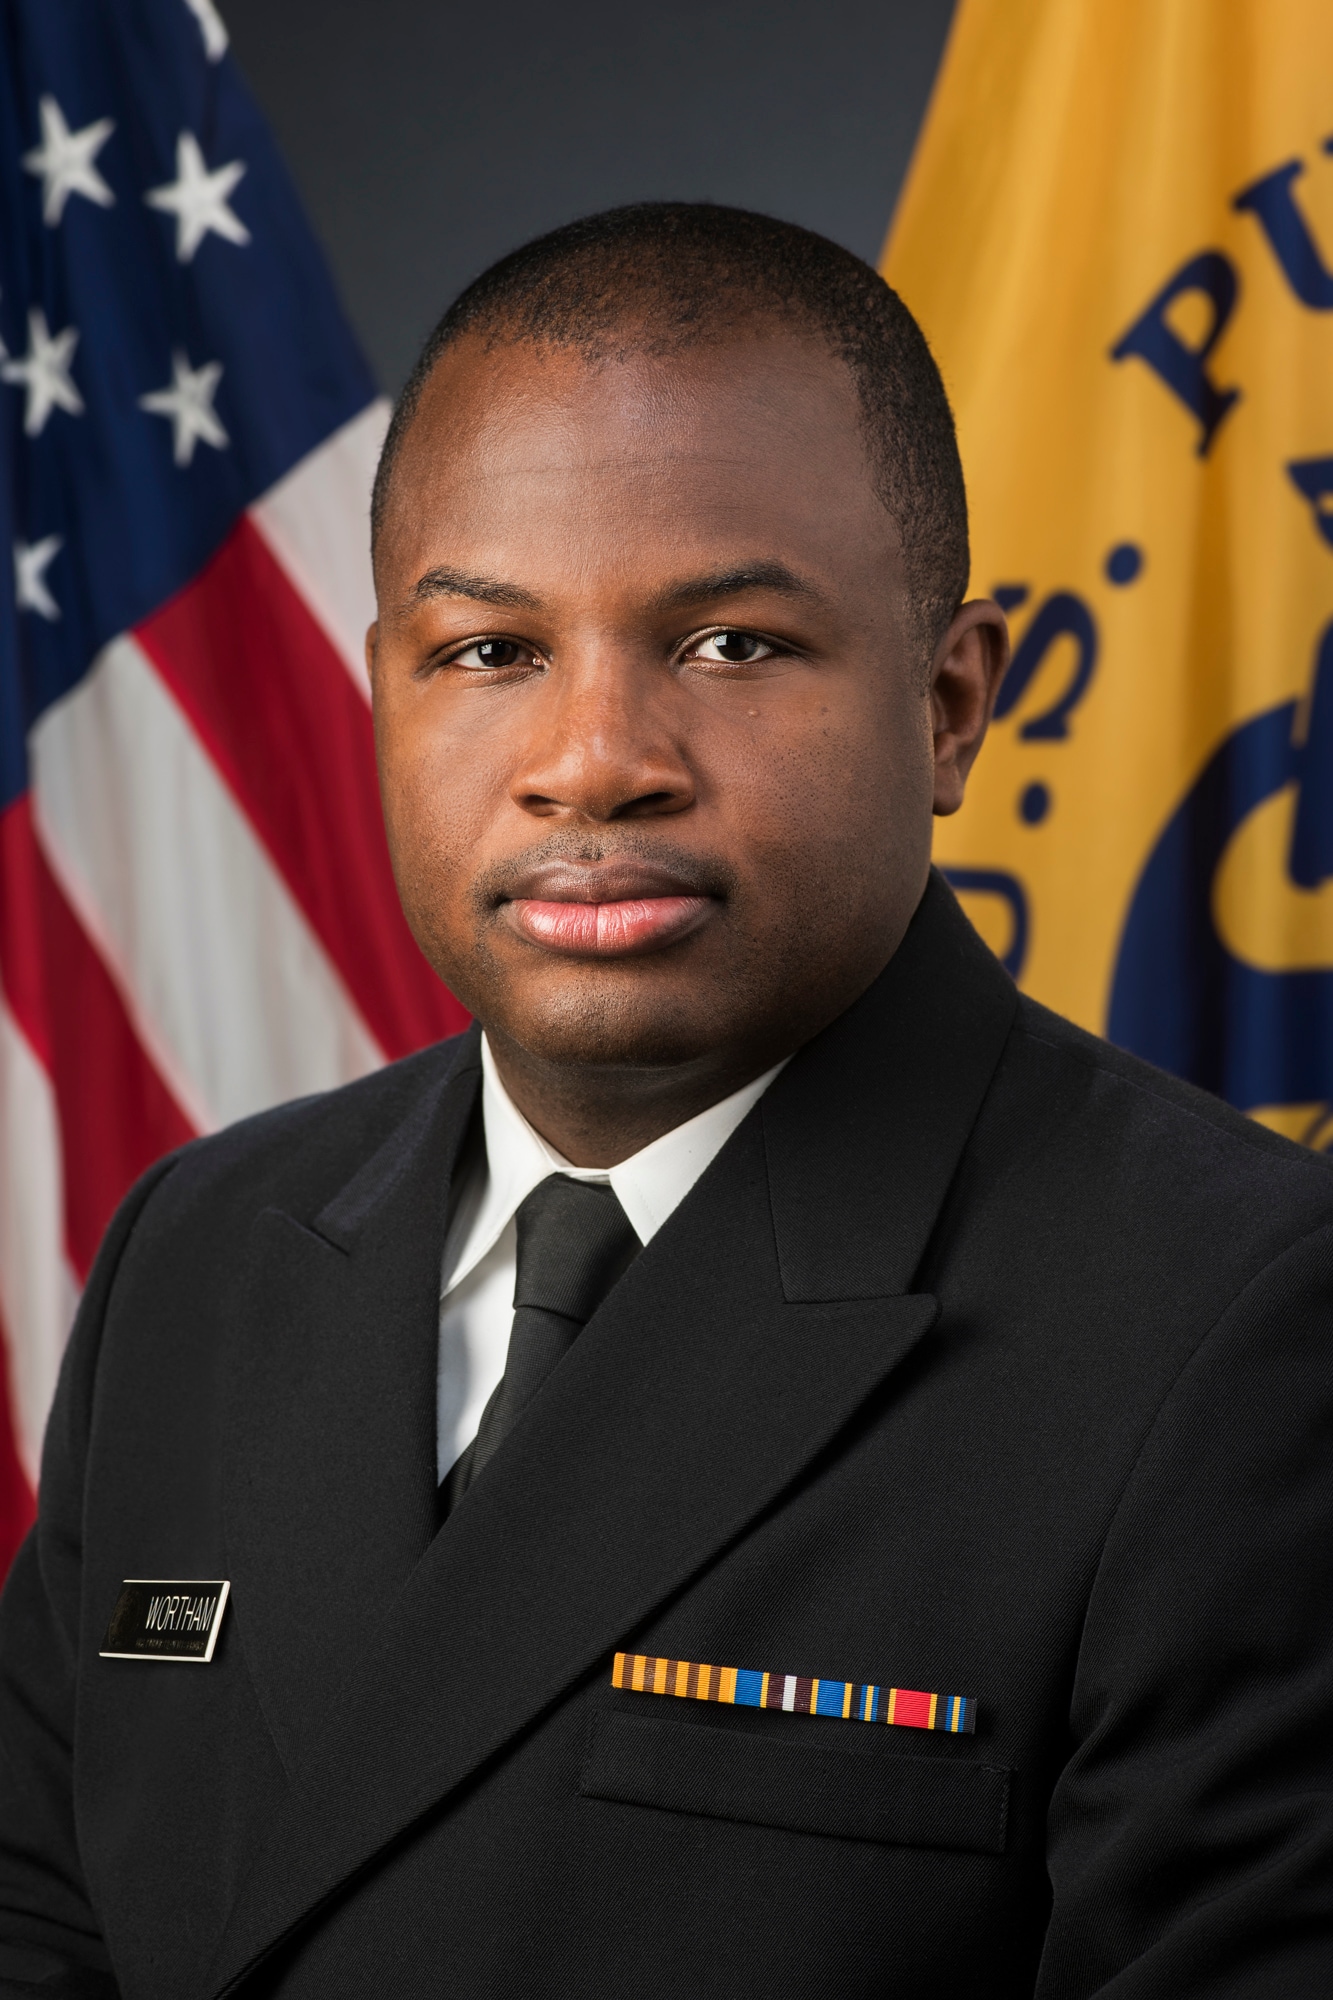 Headshot of Dr. Jonathan. He is in military uniform with the U.S. and U.S. Public Health flags in the background